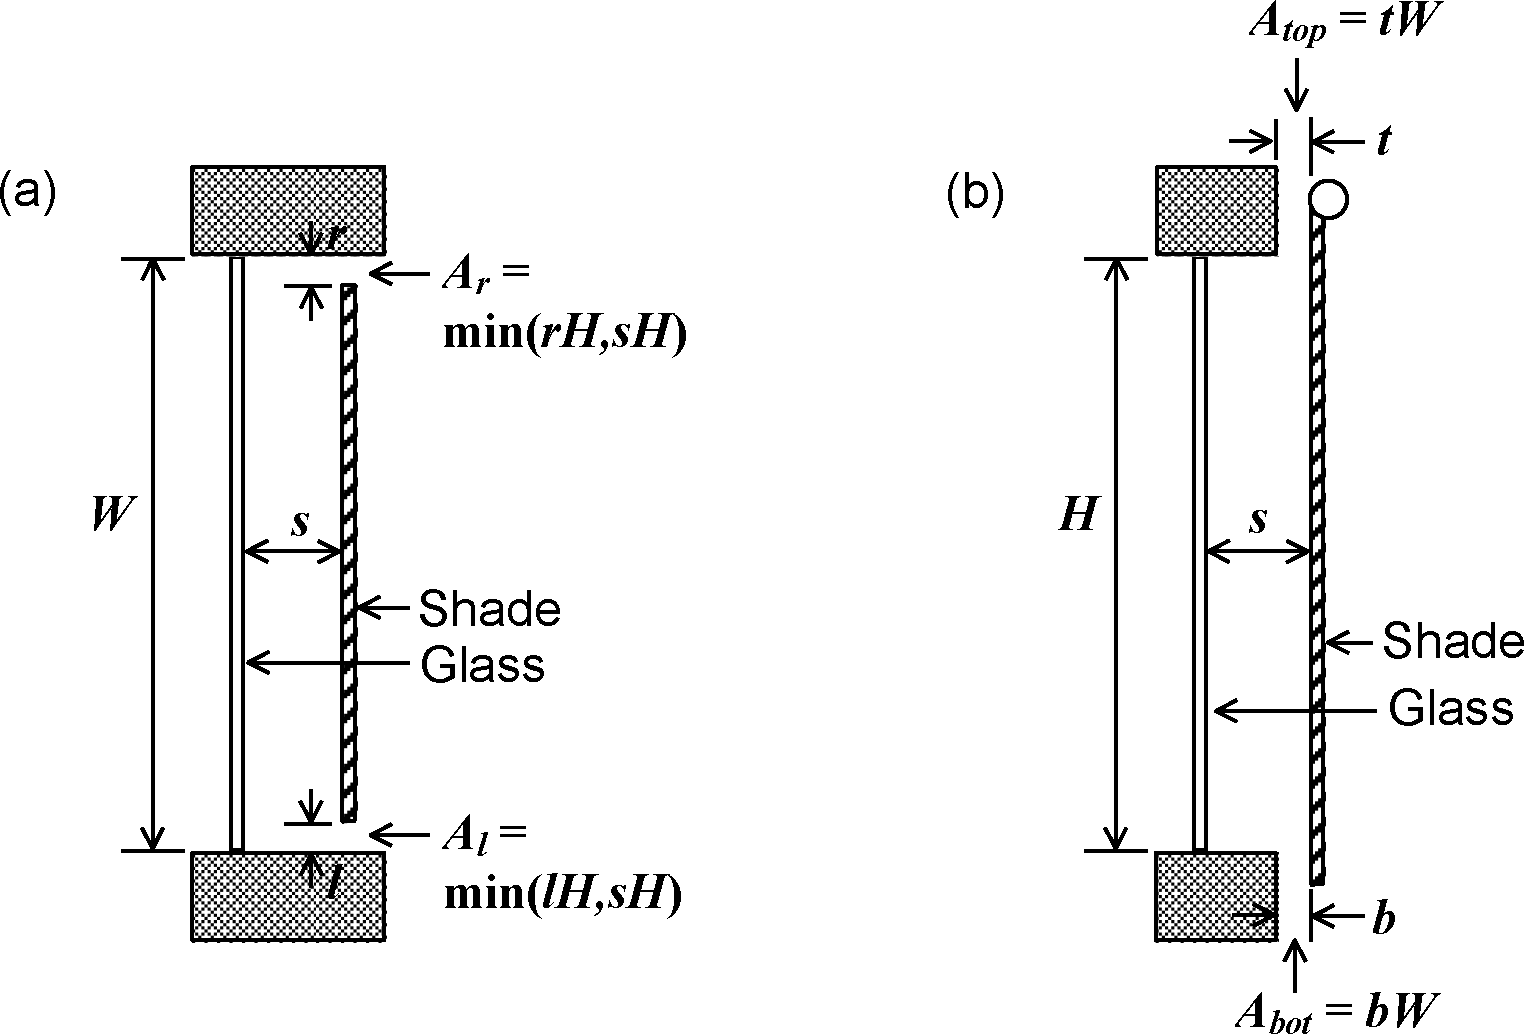 Examples of openings for an interior shading layer covering glass of height H and width W. Not to scale. (a) Horizontal section through shading layer with openings on the left and right sides (top view). (b) Vertical section through shading layer with openings at the top and bottom (side view).